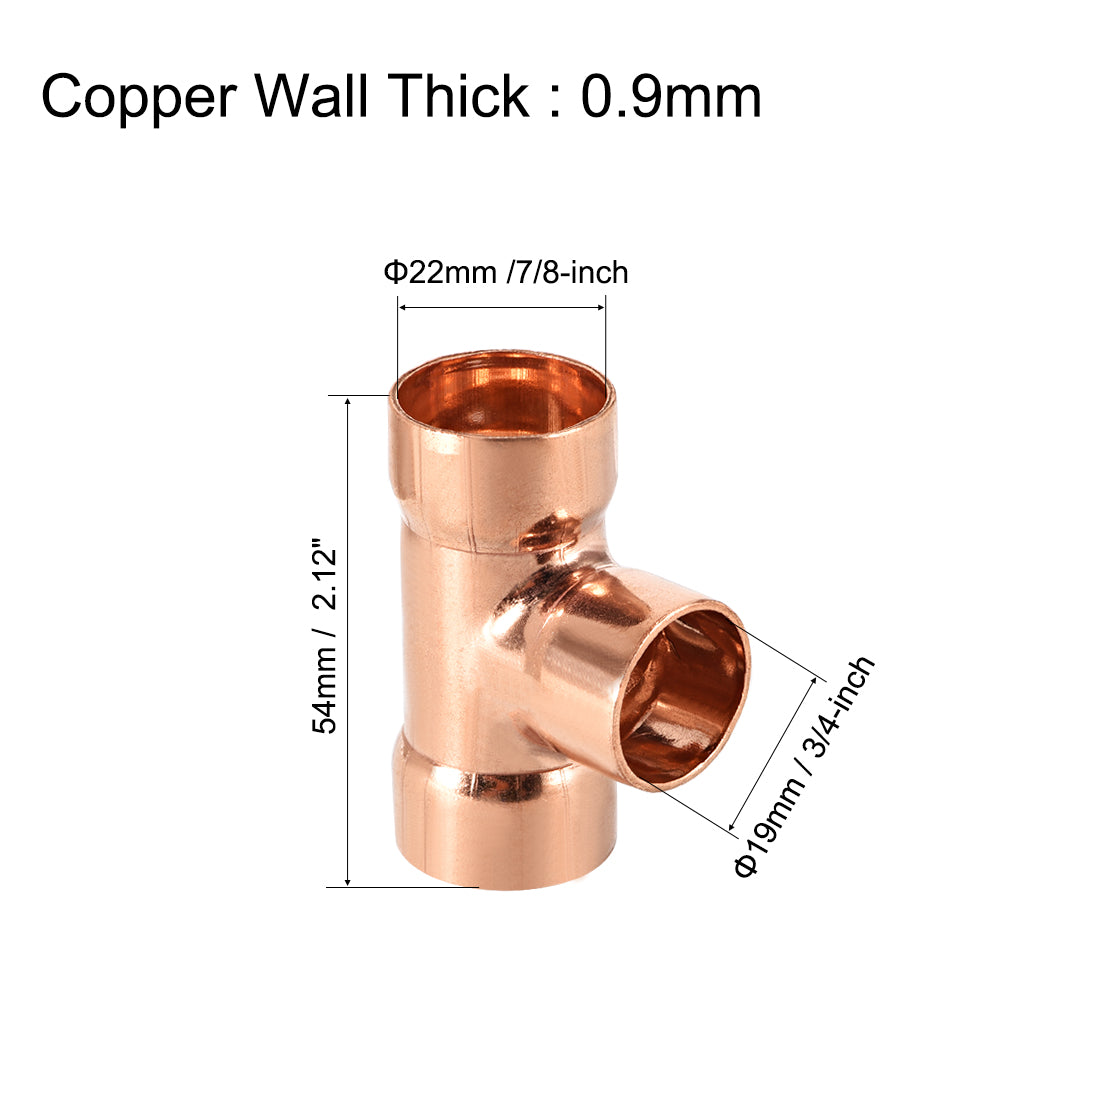 uxcell Uxcell 7/8-inch x 3/4-inch x 7/8-inch Copper Reducing Tee Copper Pressure Pipe Fitting Conector  for Plumbing Supply and Refrigeration 2pcs